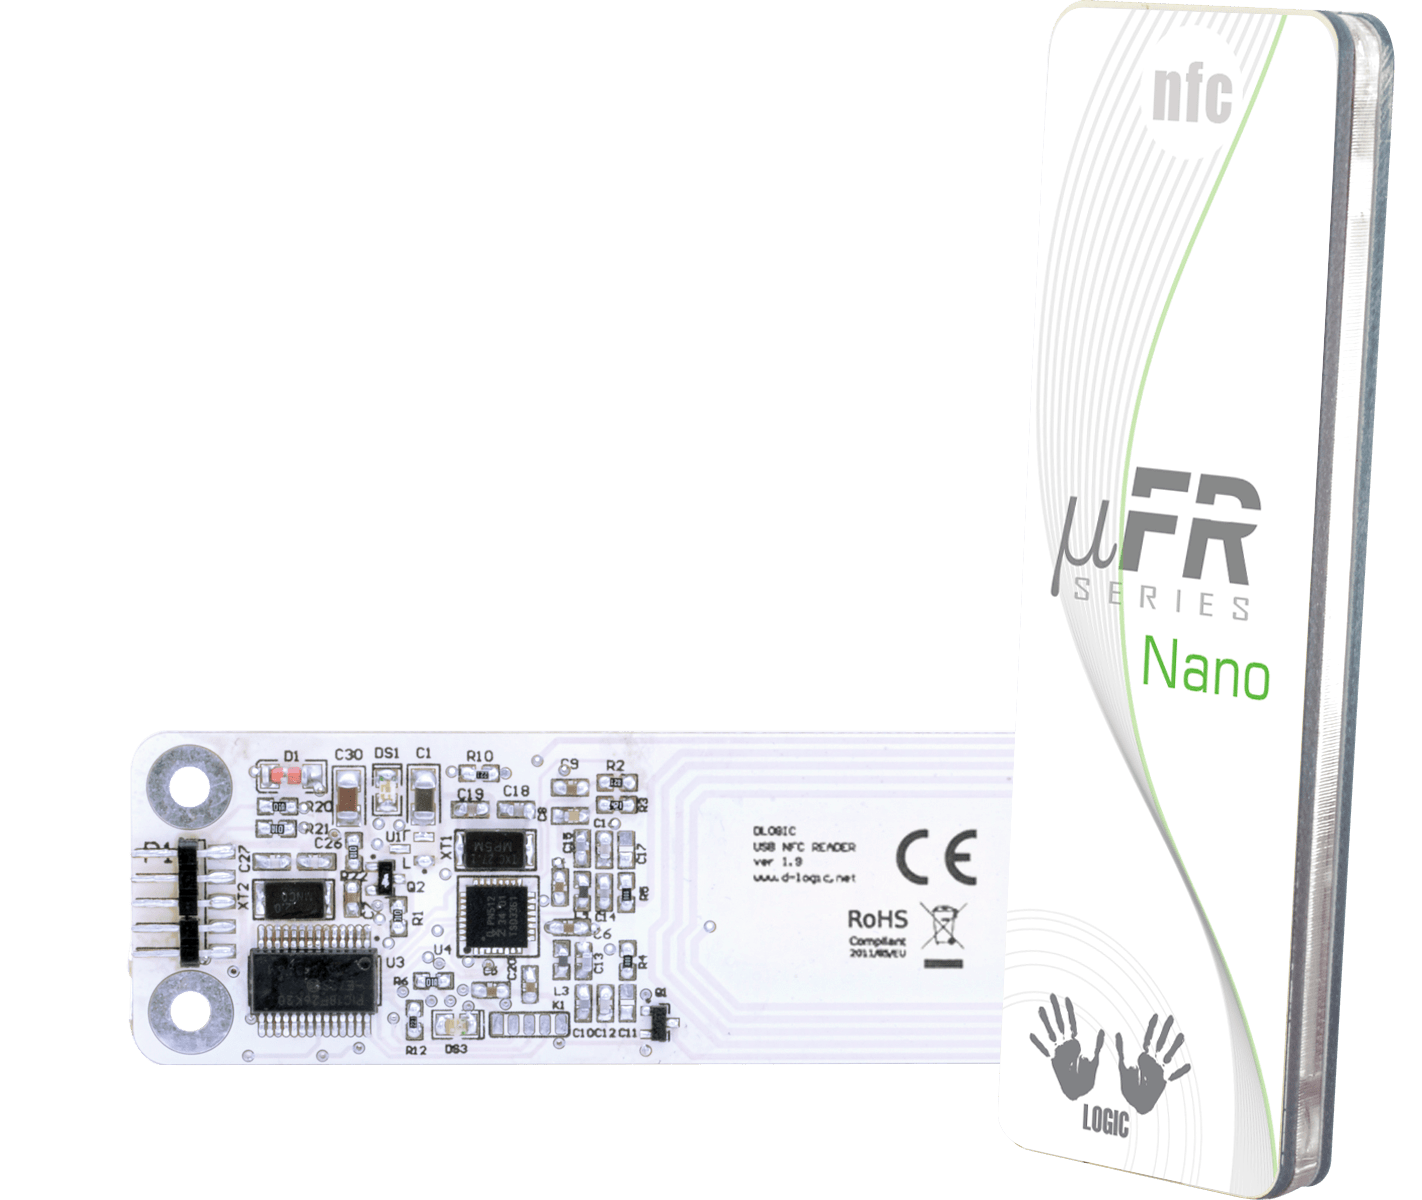 NFC Module - NFC Reader uFR Nano - Development tool with free SDK in all major programming languages